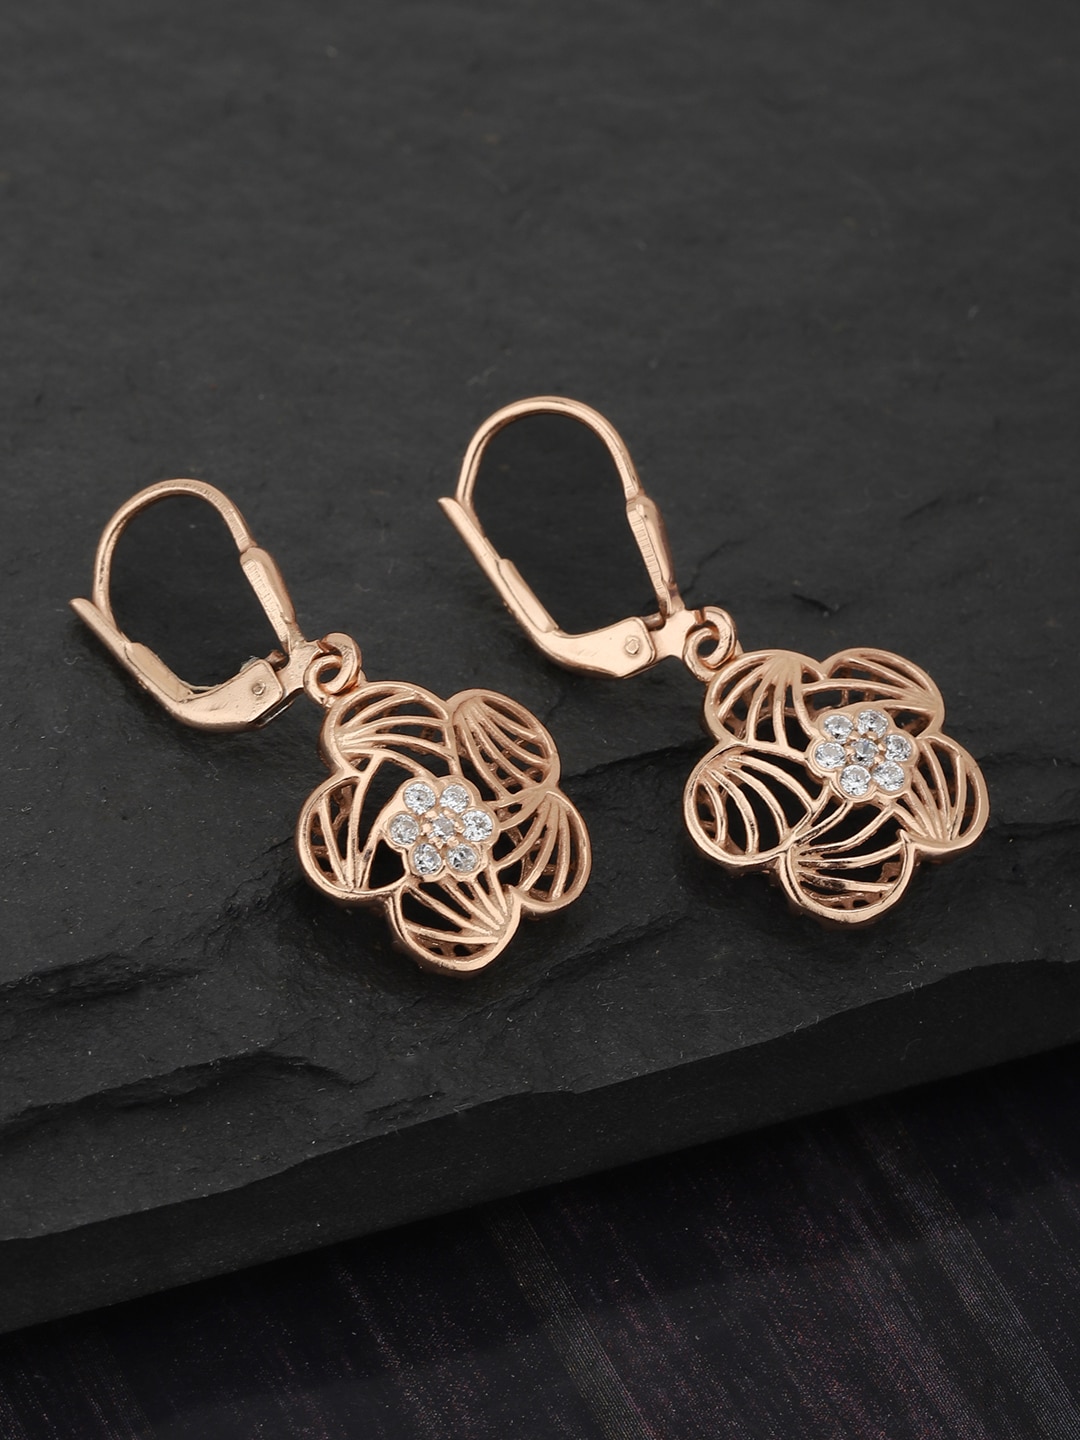 Carlton London Rose Gold-Plated 925 Sterling Silver Floral Drop Earrings Price in India